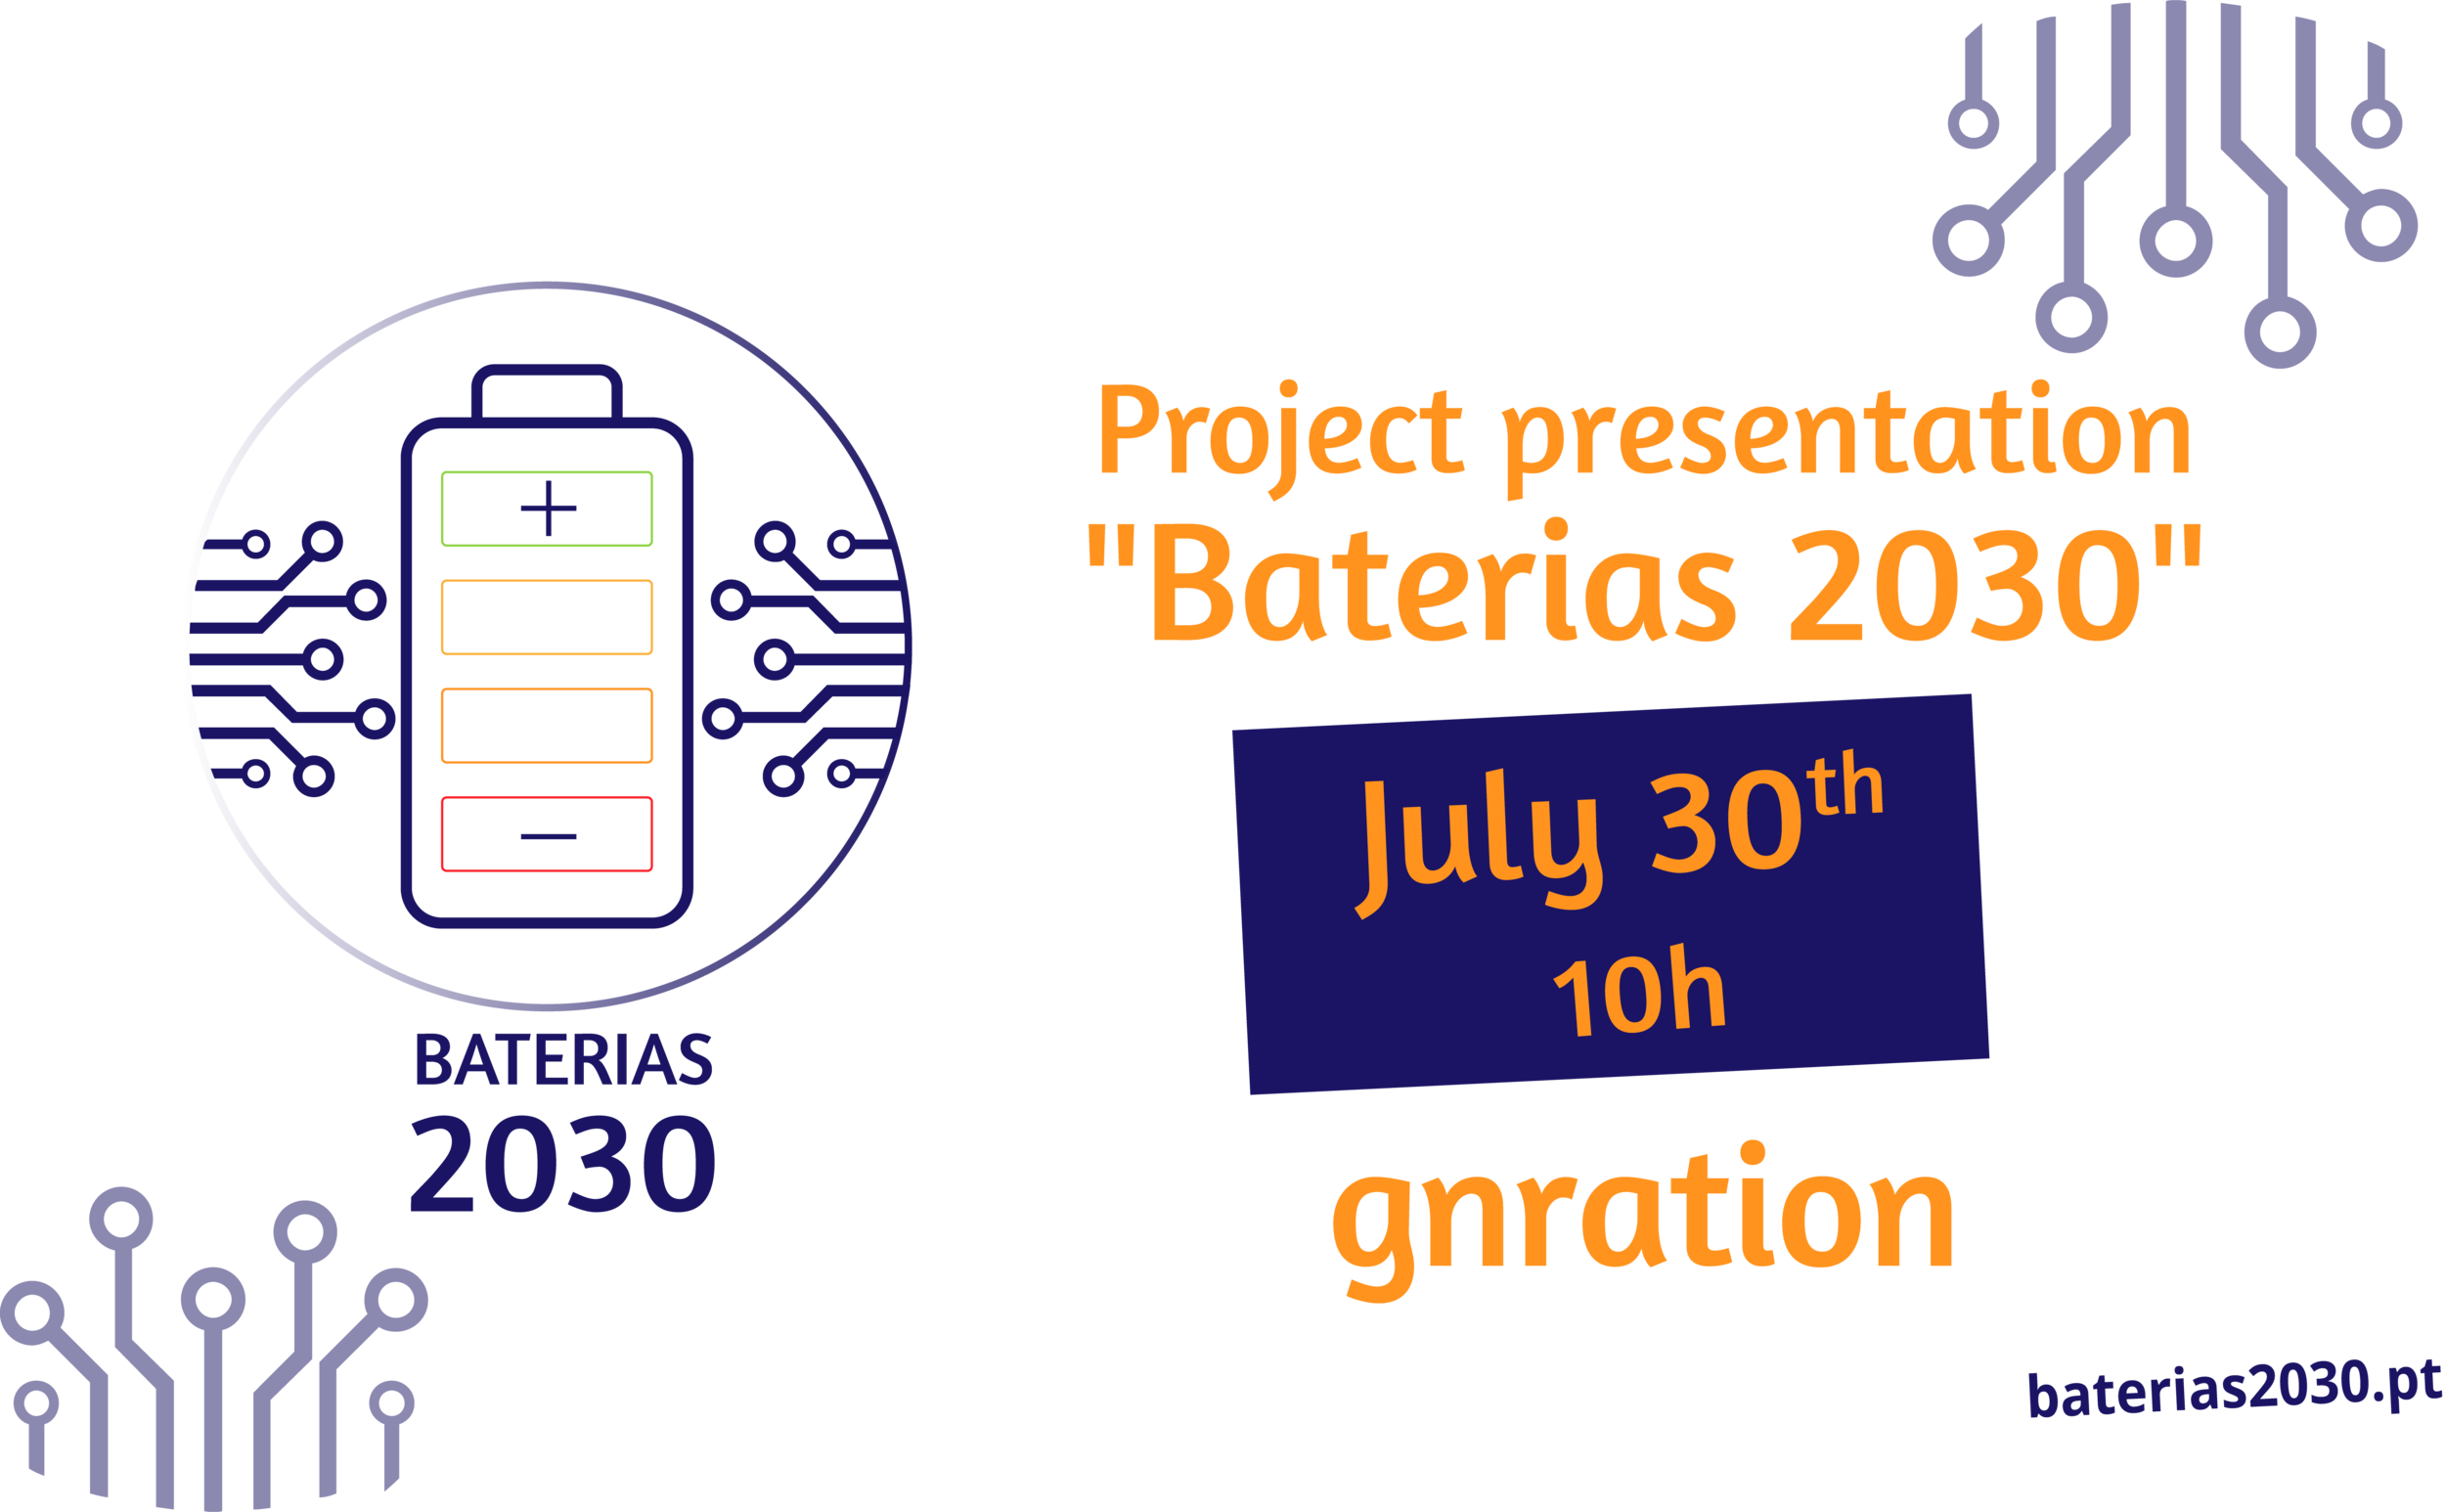 Minister of Environment and Secretary of State for Energy at the Official Launch of the “Baterias 2030” Project